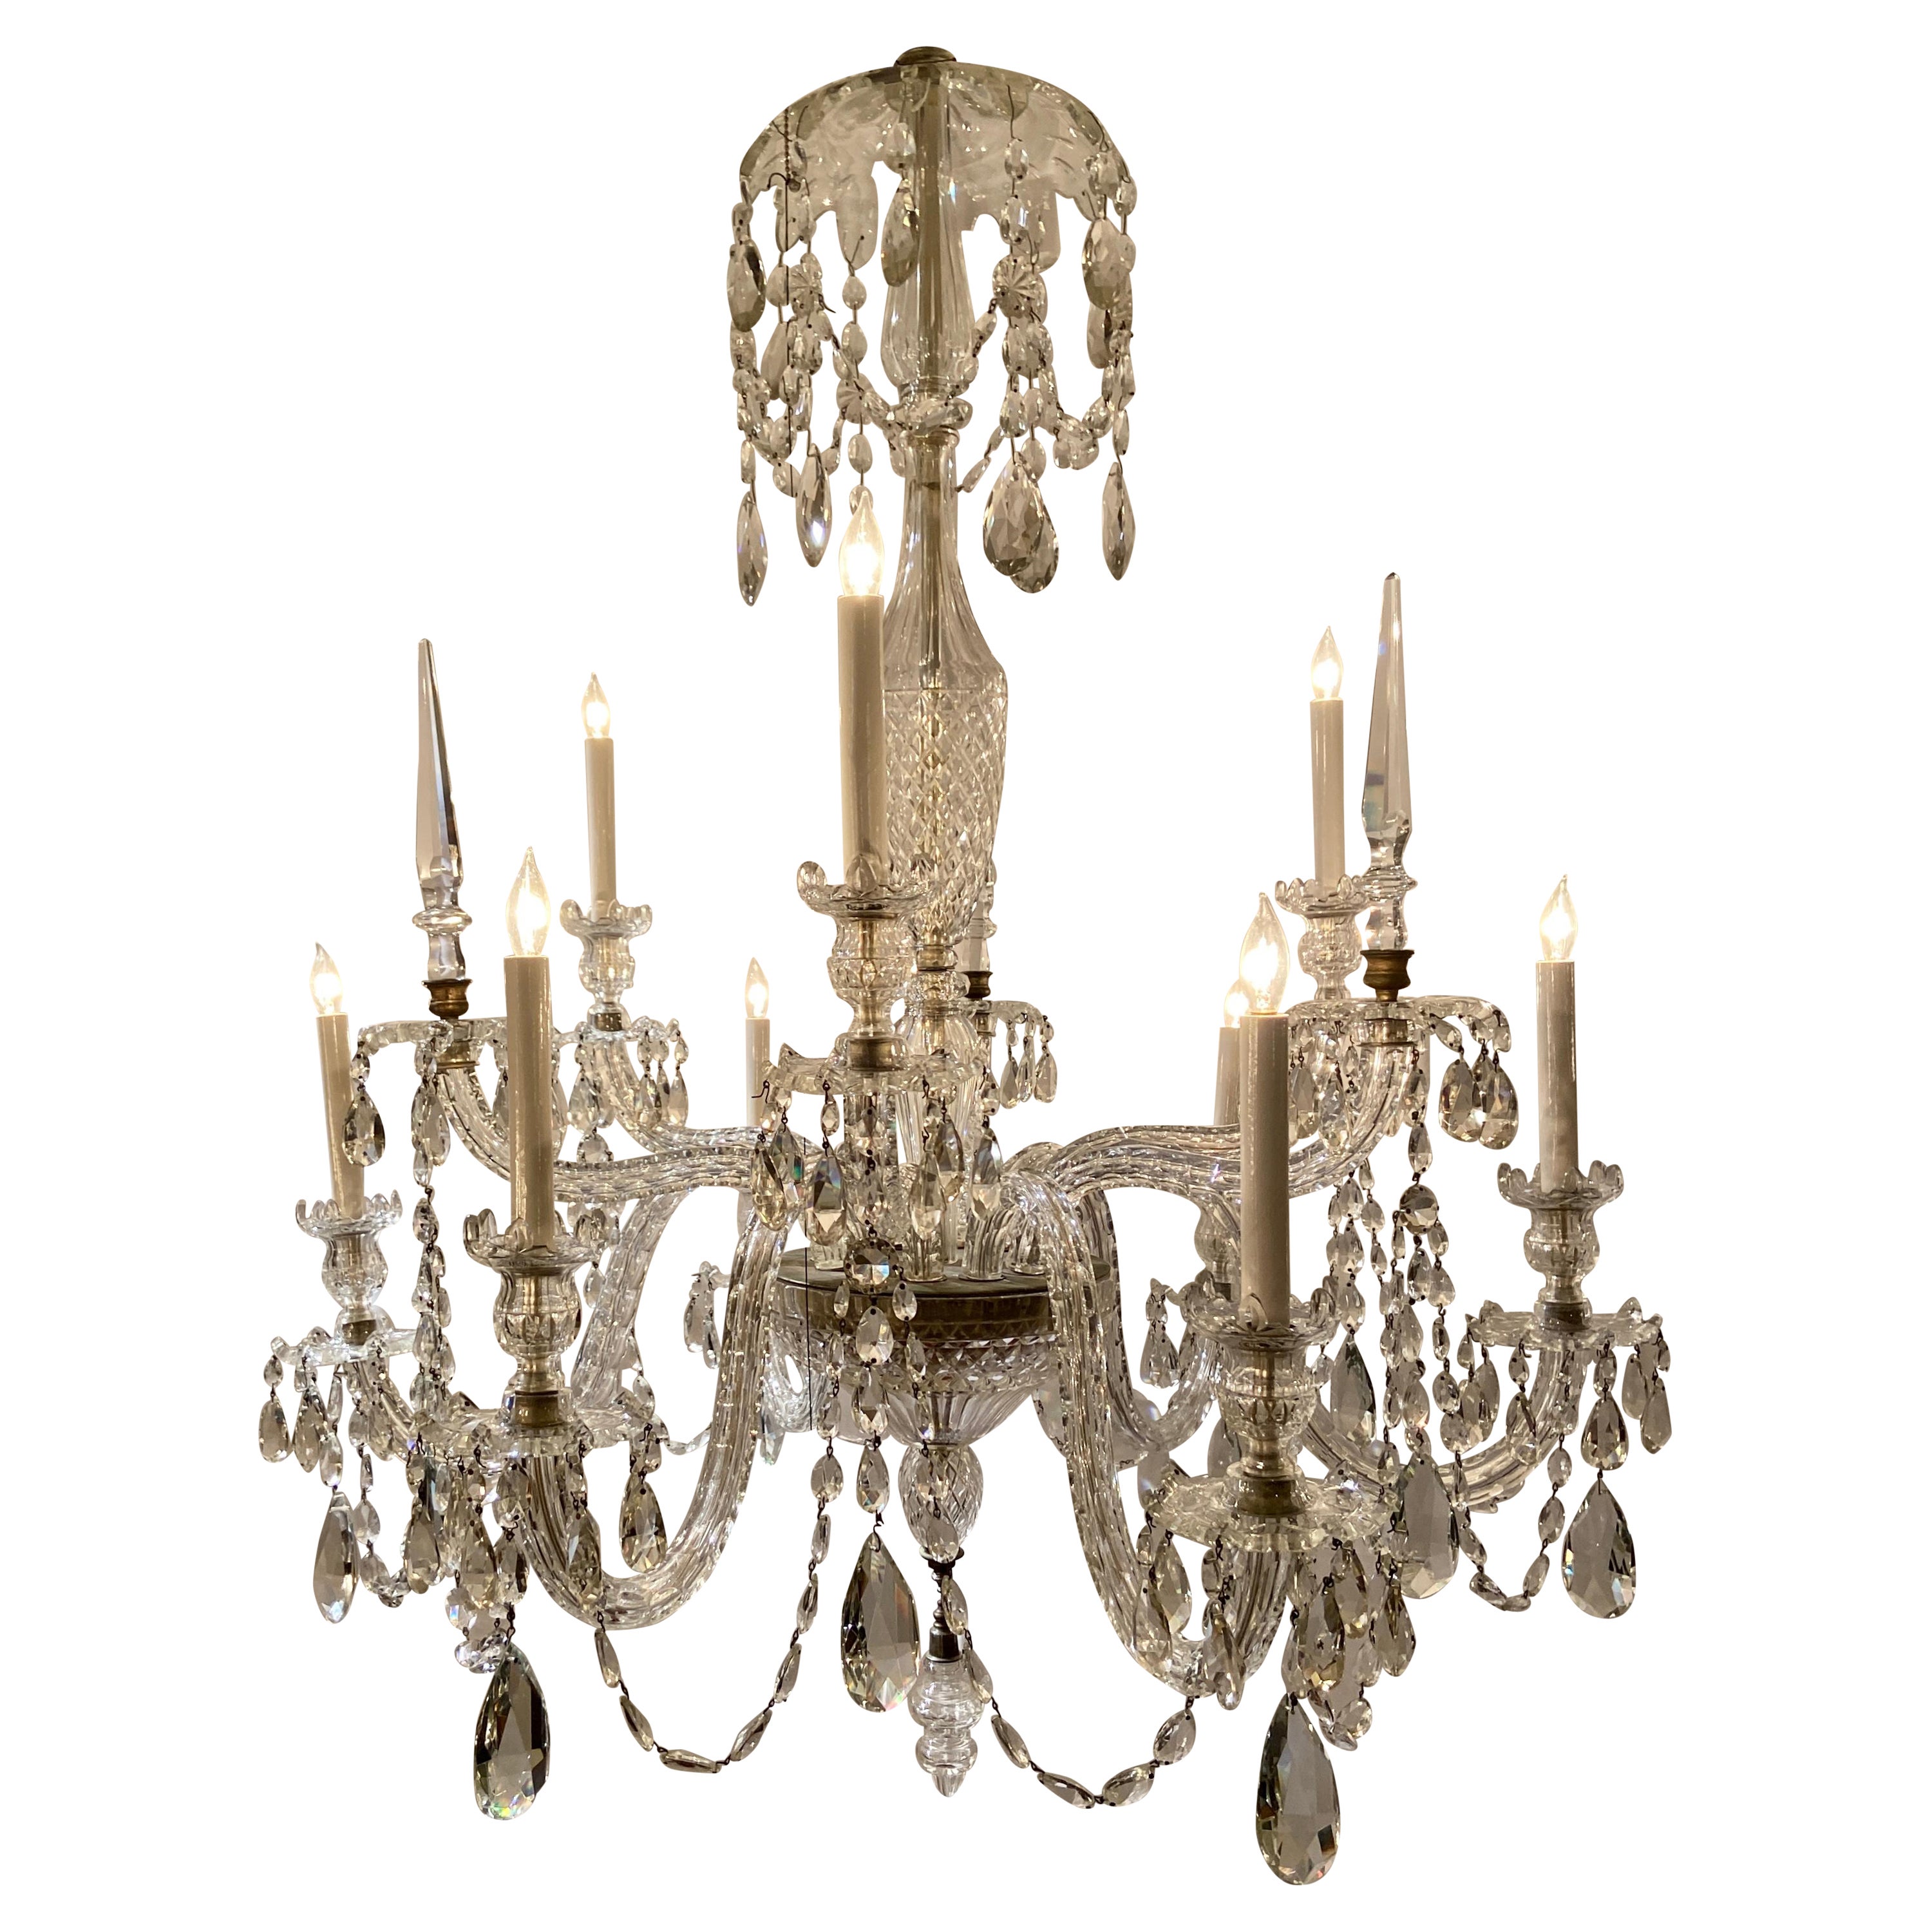 Antique Irish Lead Crystal Two-Tier 9-Light Chandelier, Circa 1890-1910. For Sale